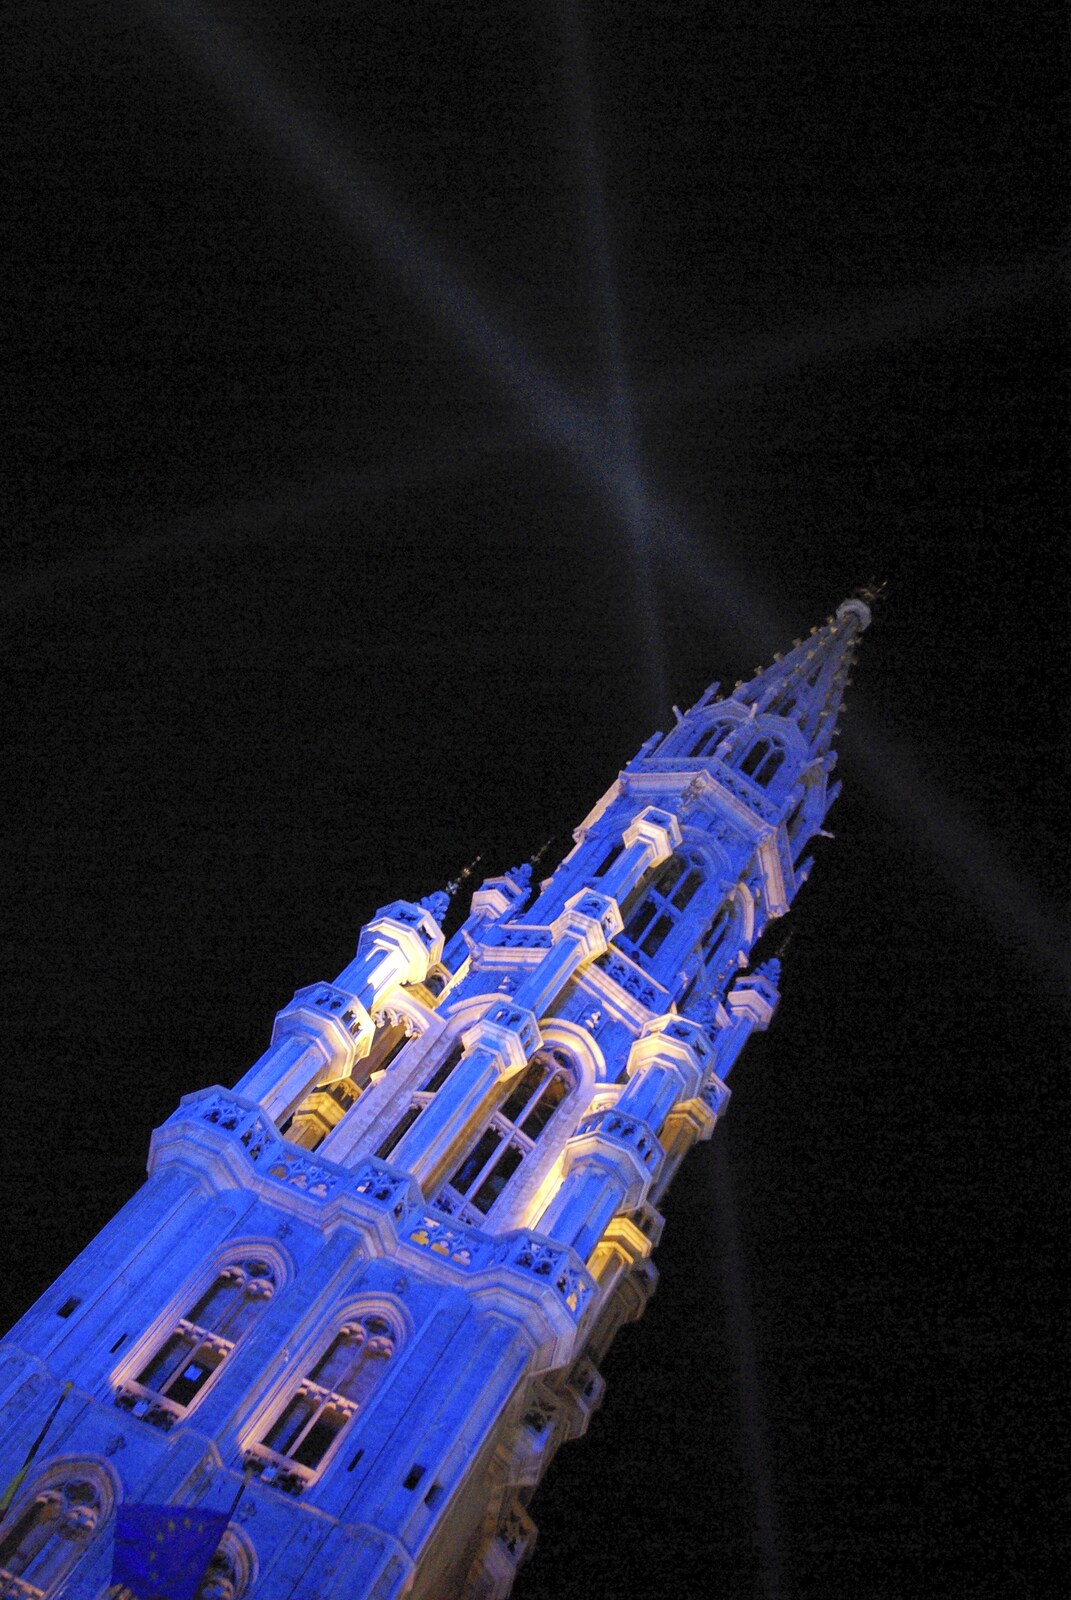 Searchlights shine from a tower from The Christmas Markets of Brussels, Belgium - 1st January 2007